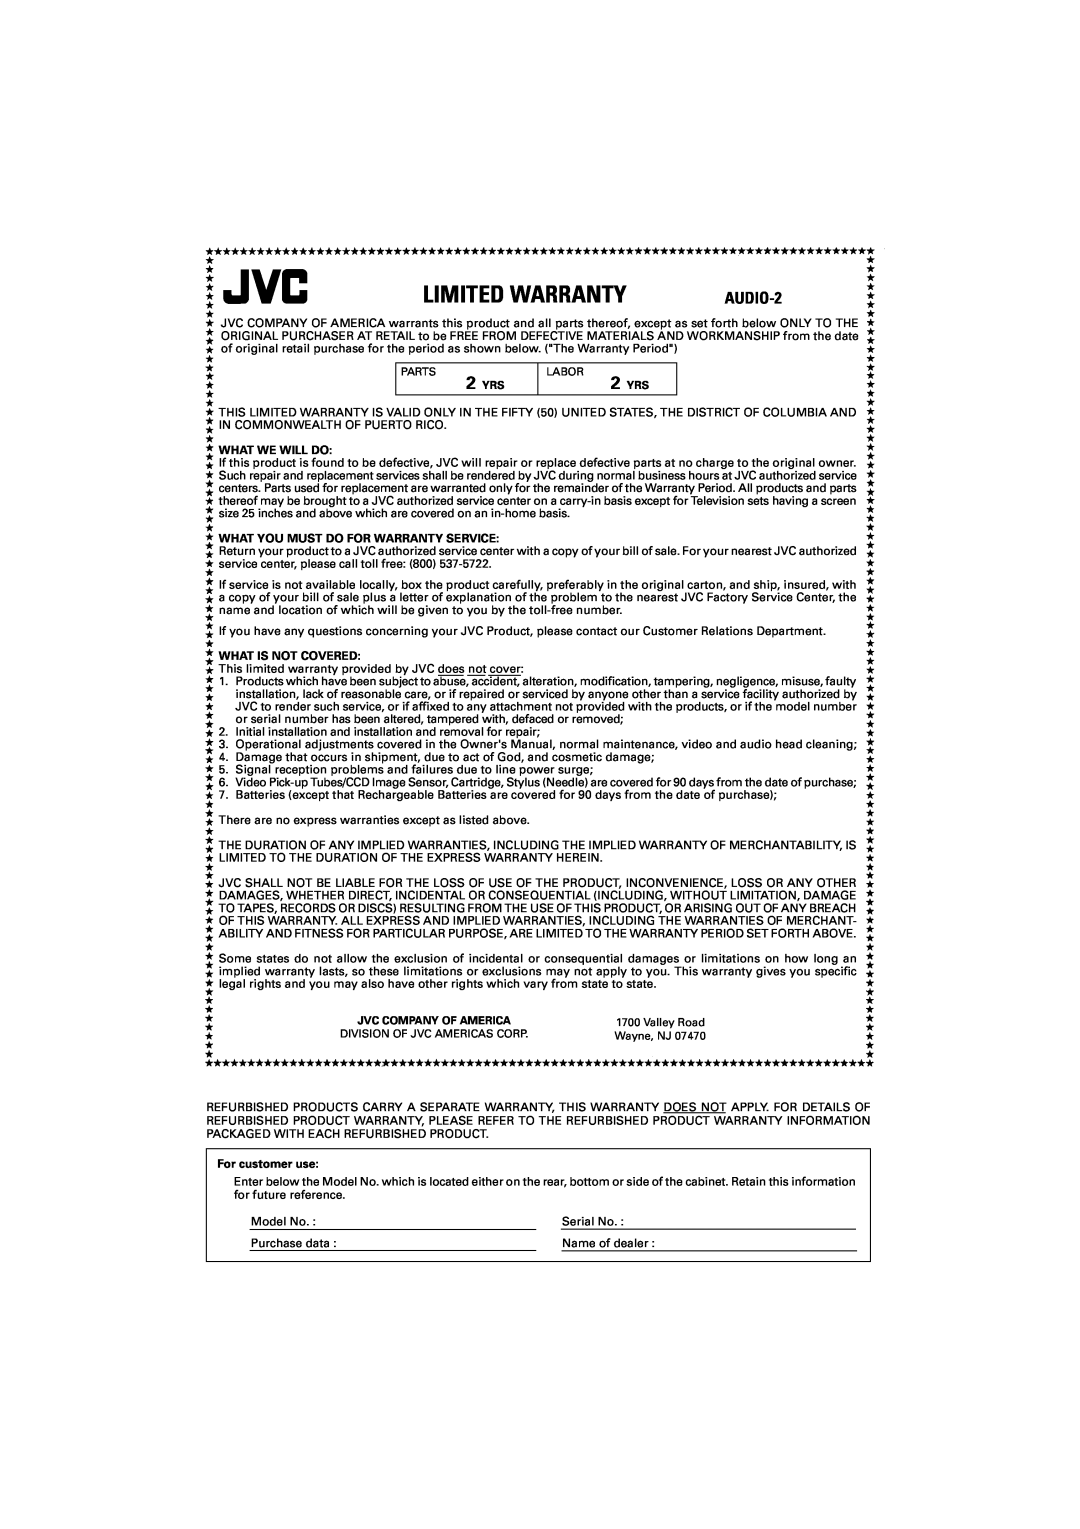 JVC RX-6022VSL Limited Warranty, AUDIO-2, What We Will Do, What You Must Do For Warranty Service, What Is Not Covered 